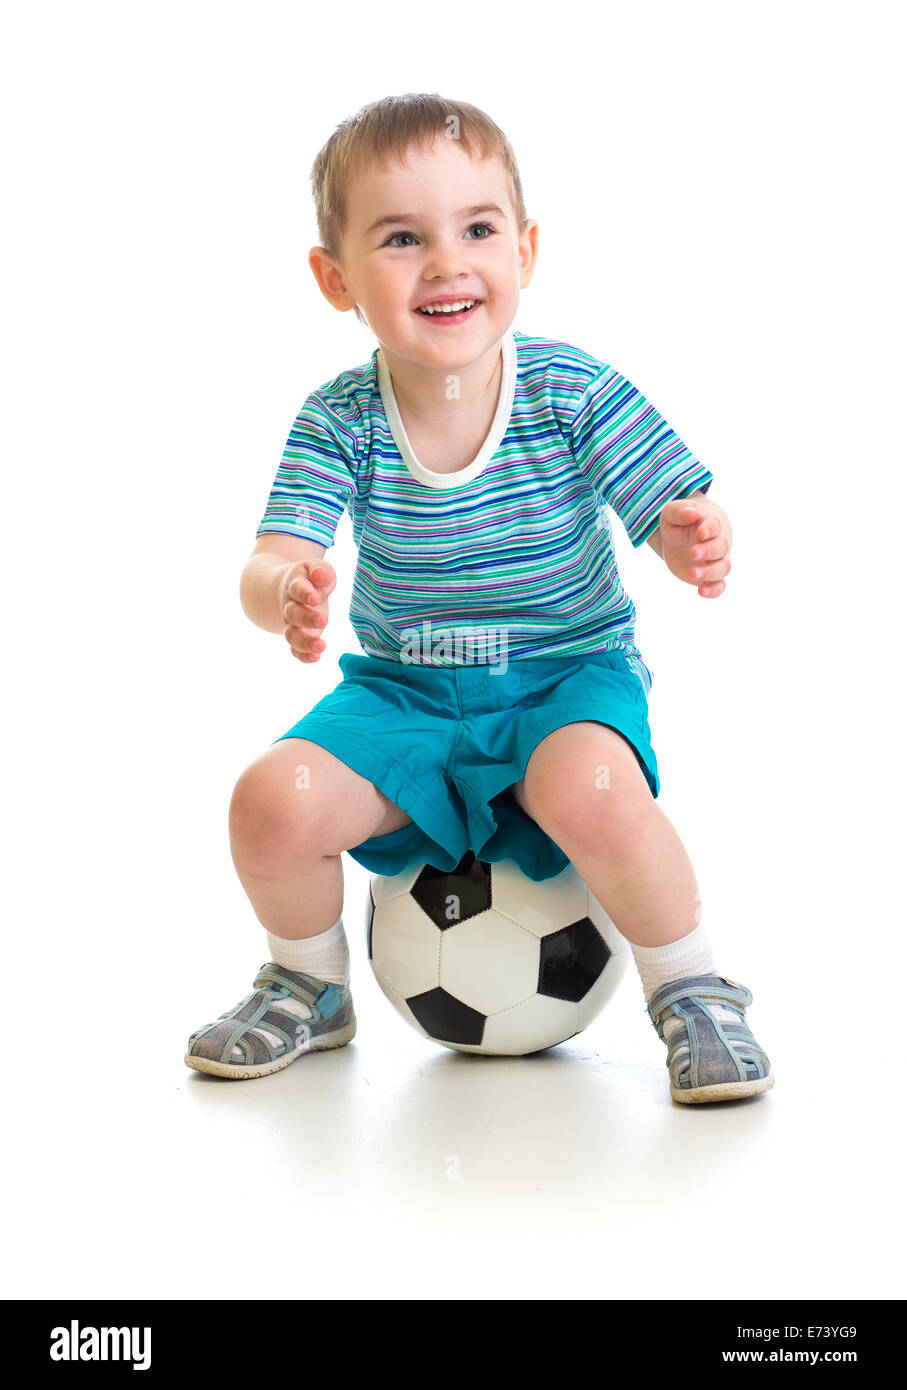 Little boy sitting on soccer ball isolated on white Stock Photo